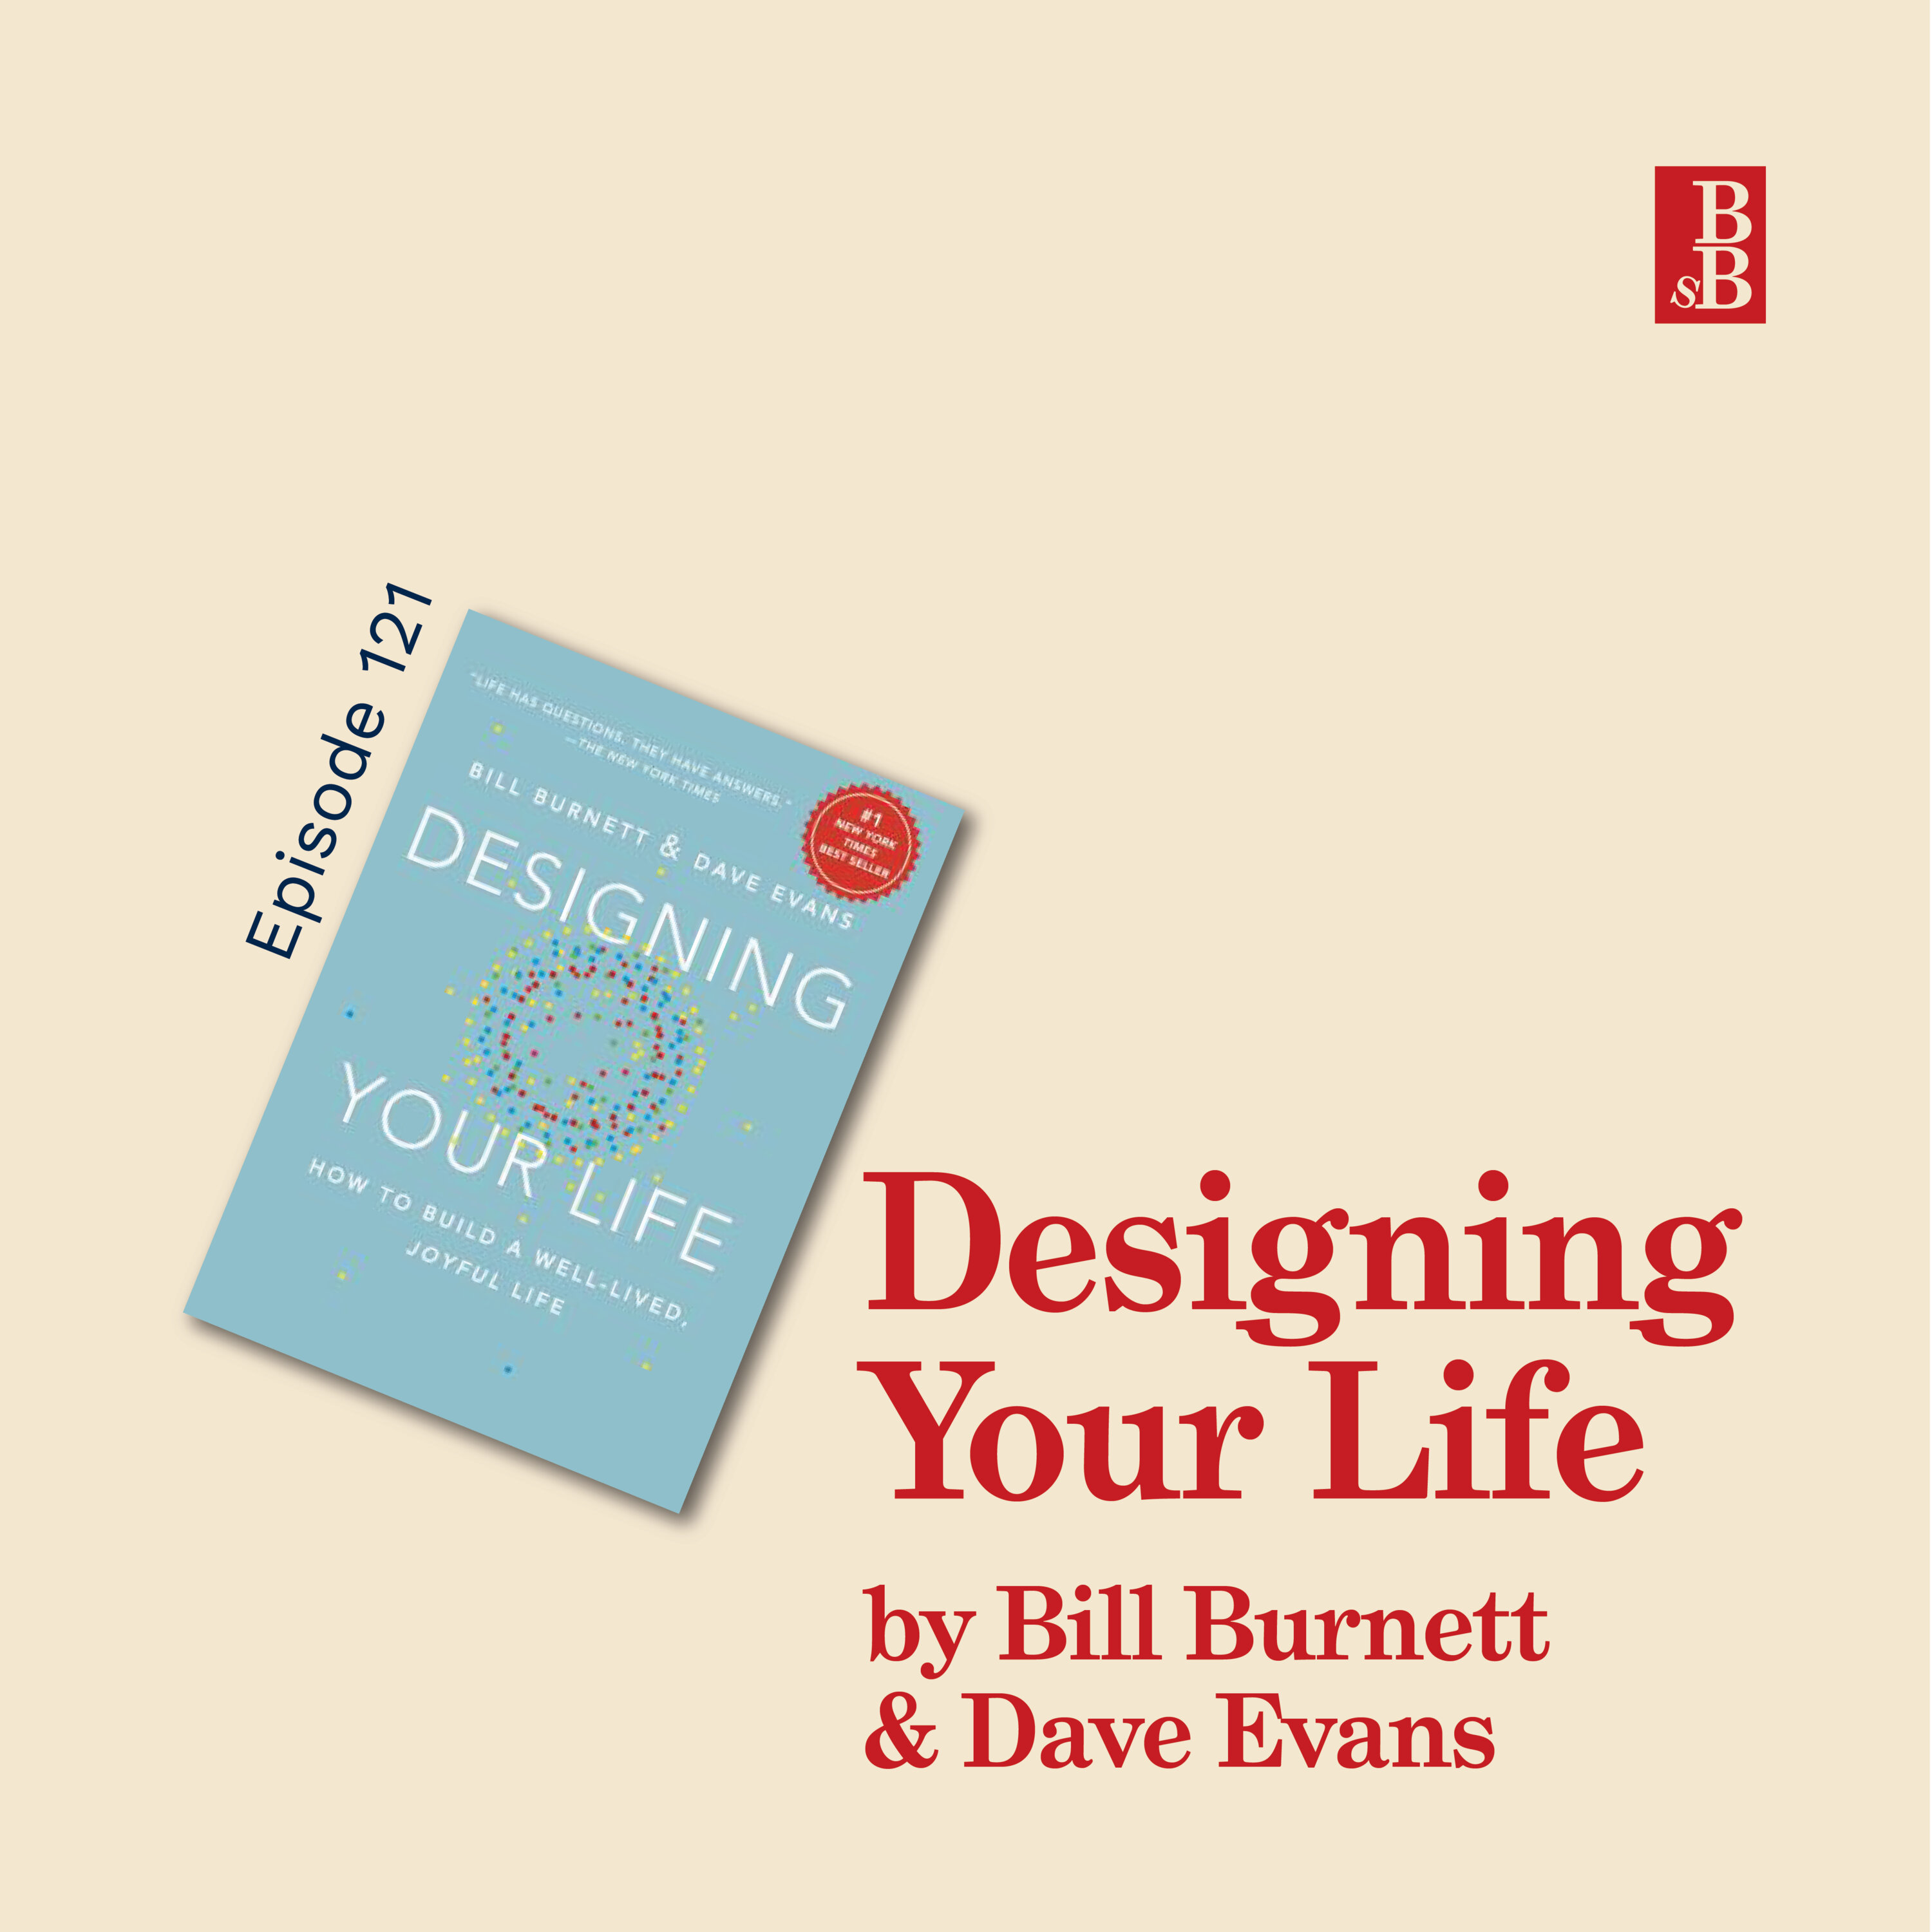 Designing Your Life by Bill Burnett and Dave Evans: Why you don't need passion for a great career